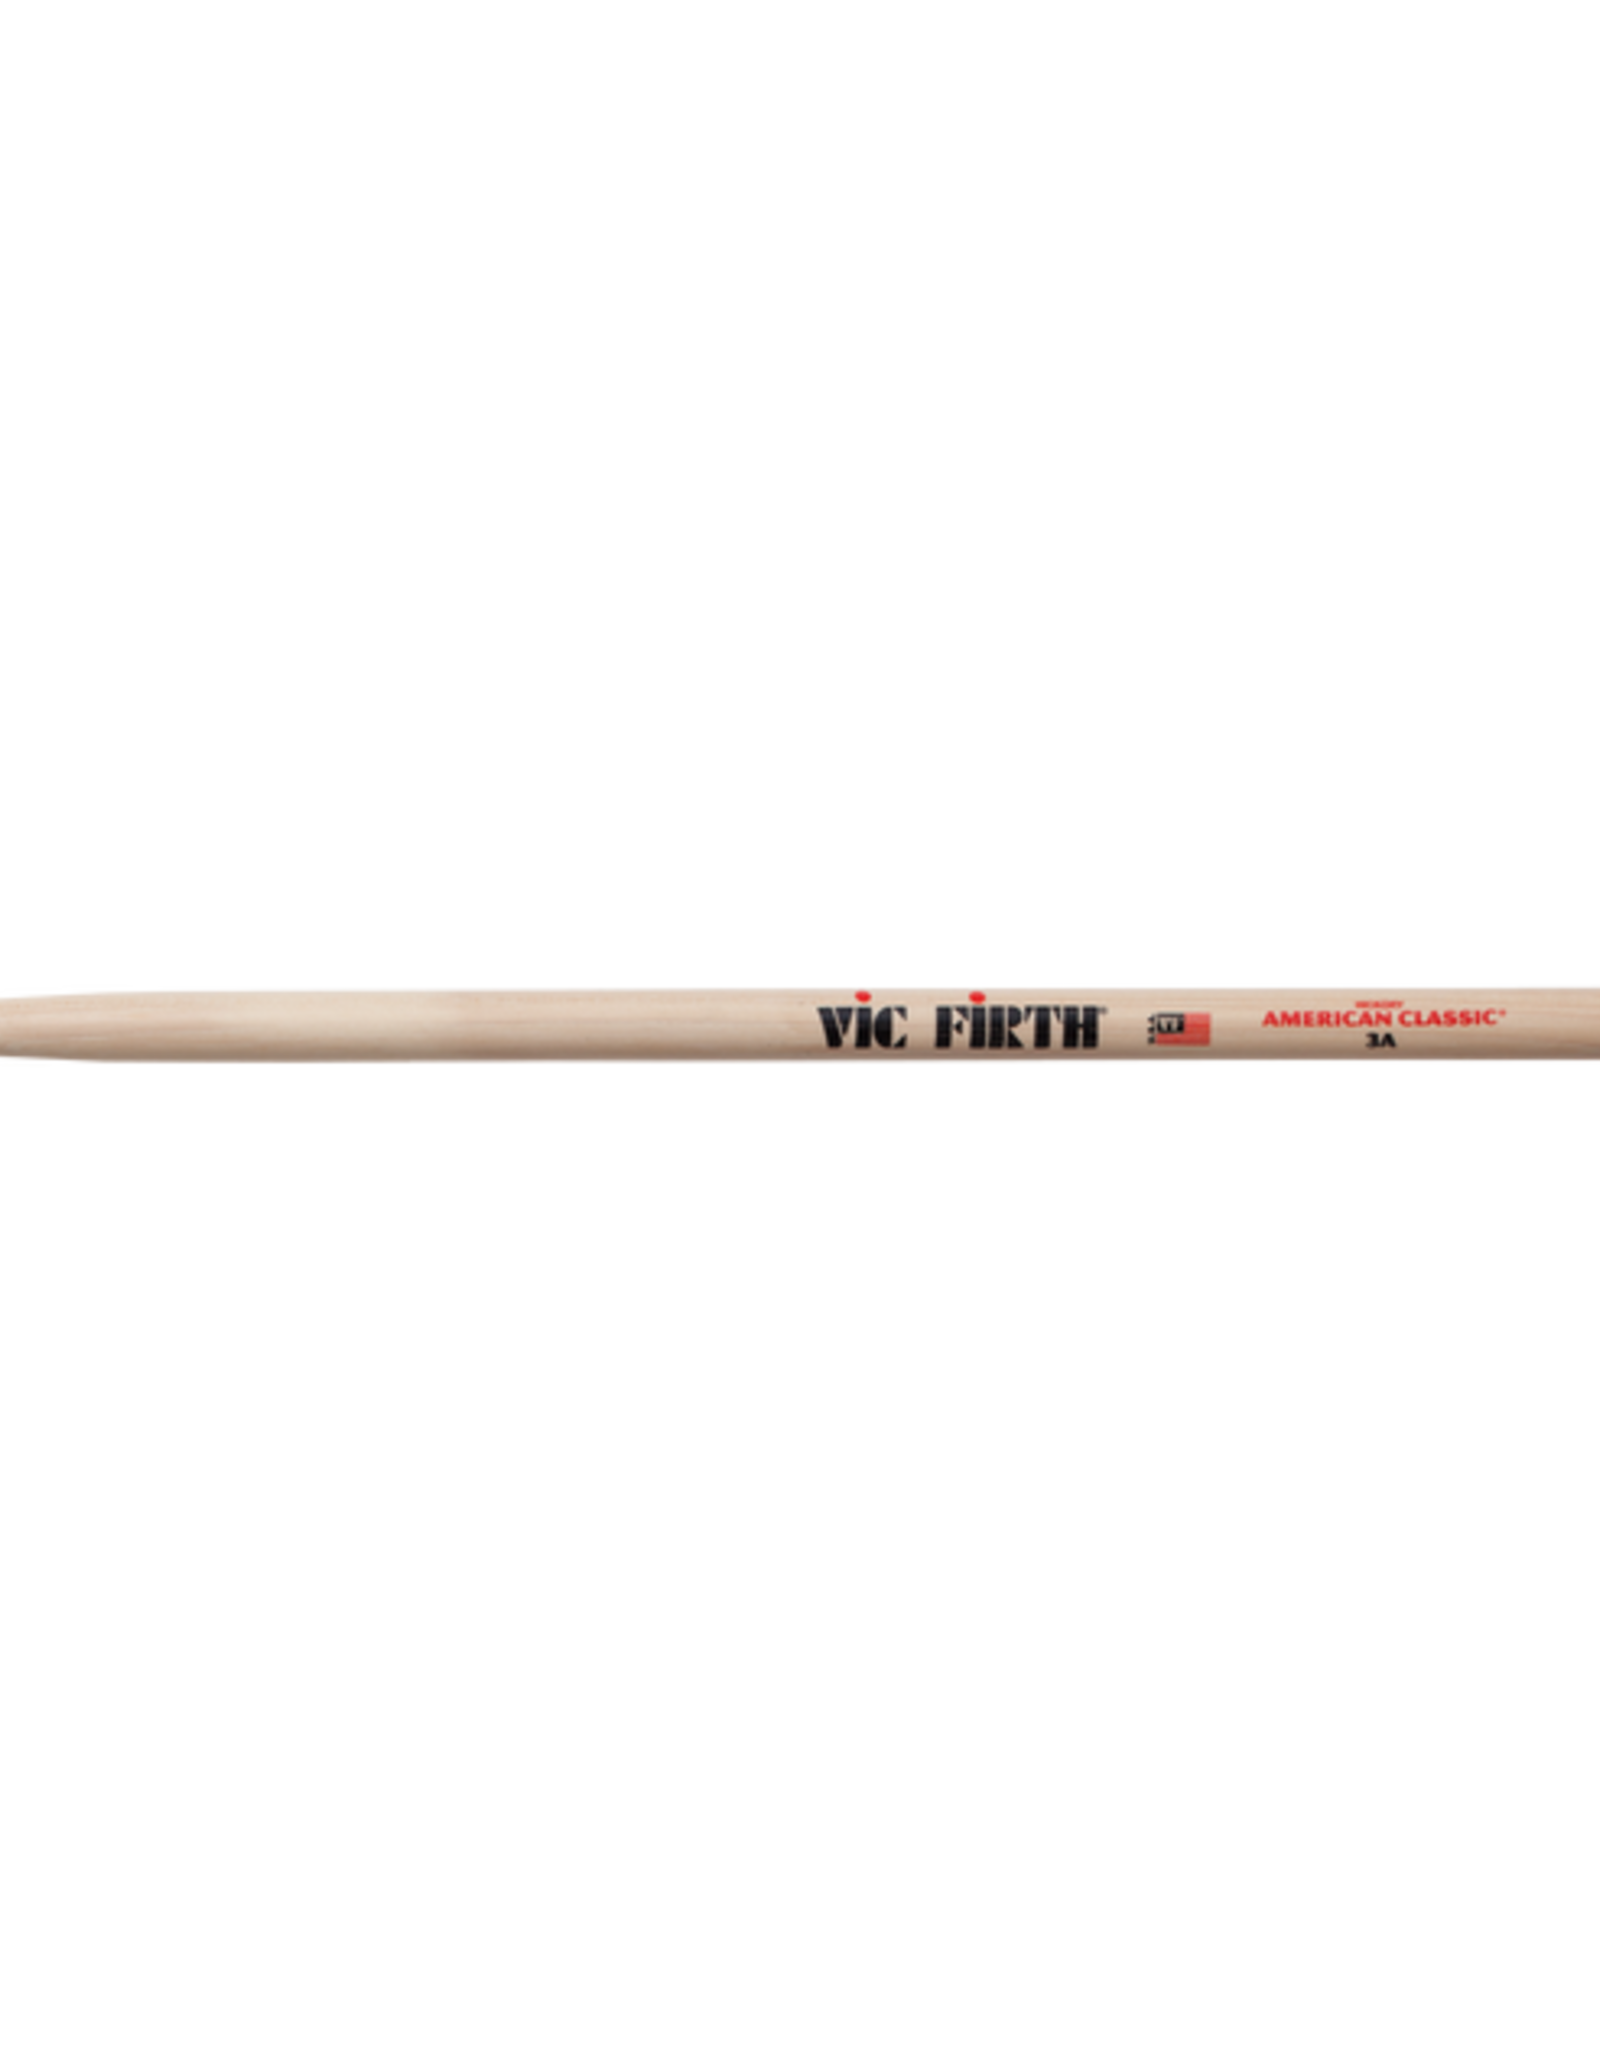 Vic Firth Vic Firth 3A American Classic Wood Tip Hickory Drum Sticks